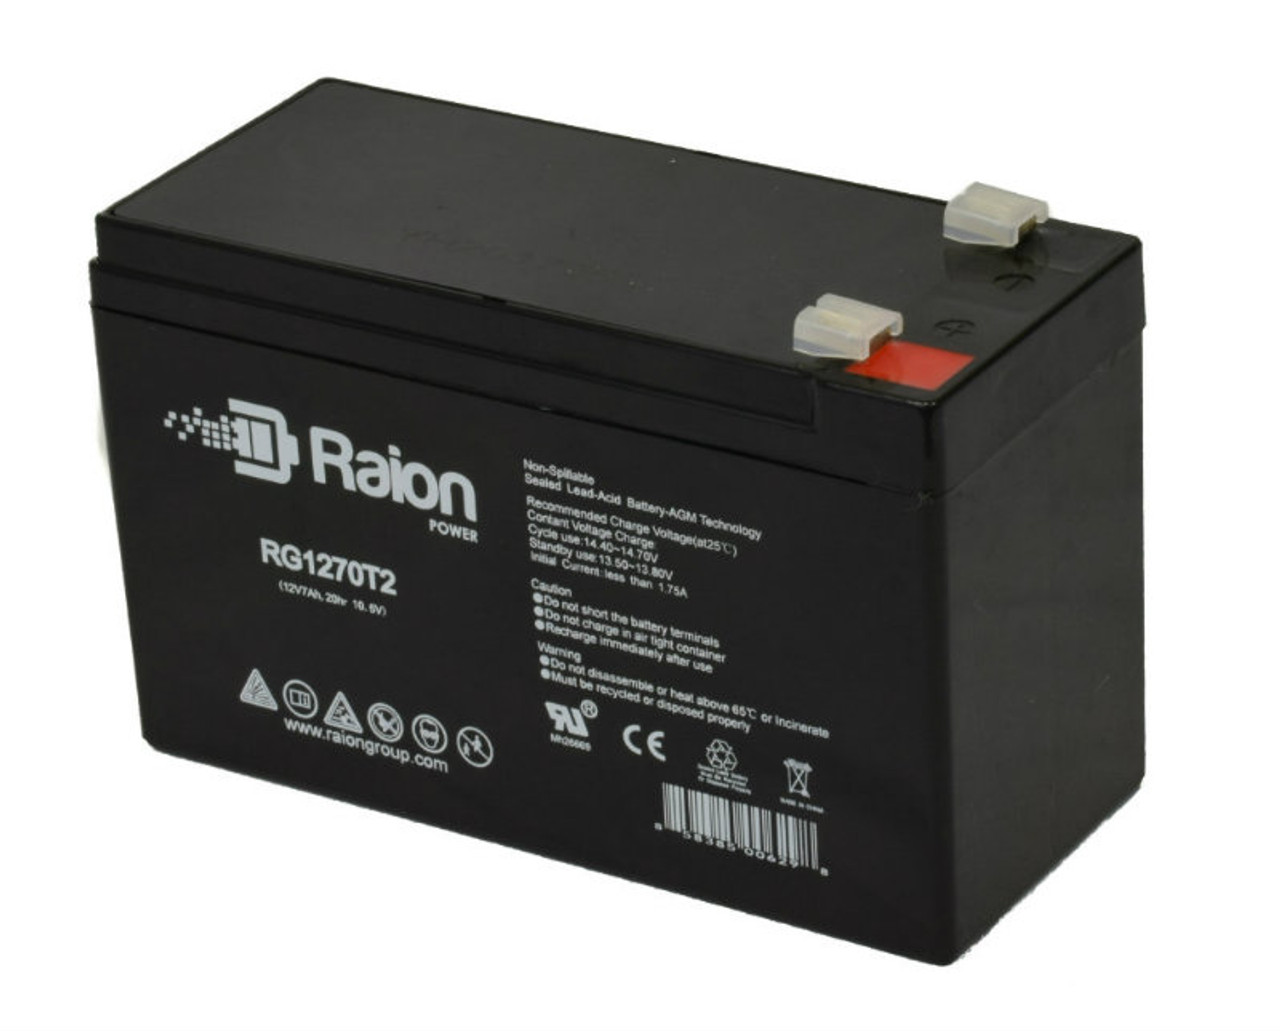 Raion Power RG1270T1 12V 7Ah Non-Spillable Replacement Battery for Cellpower CP 7-12